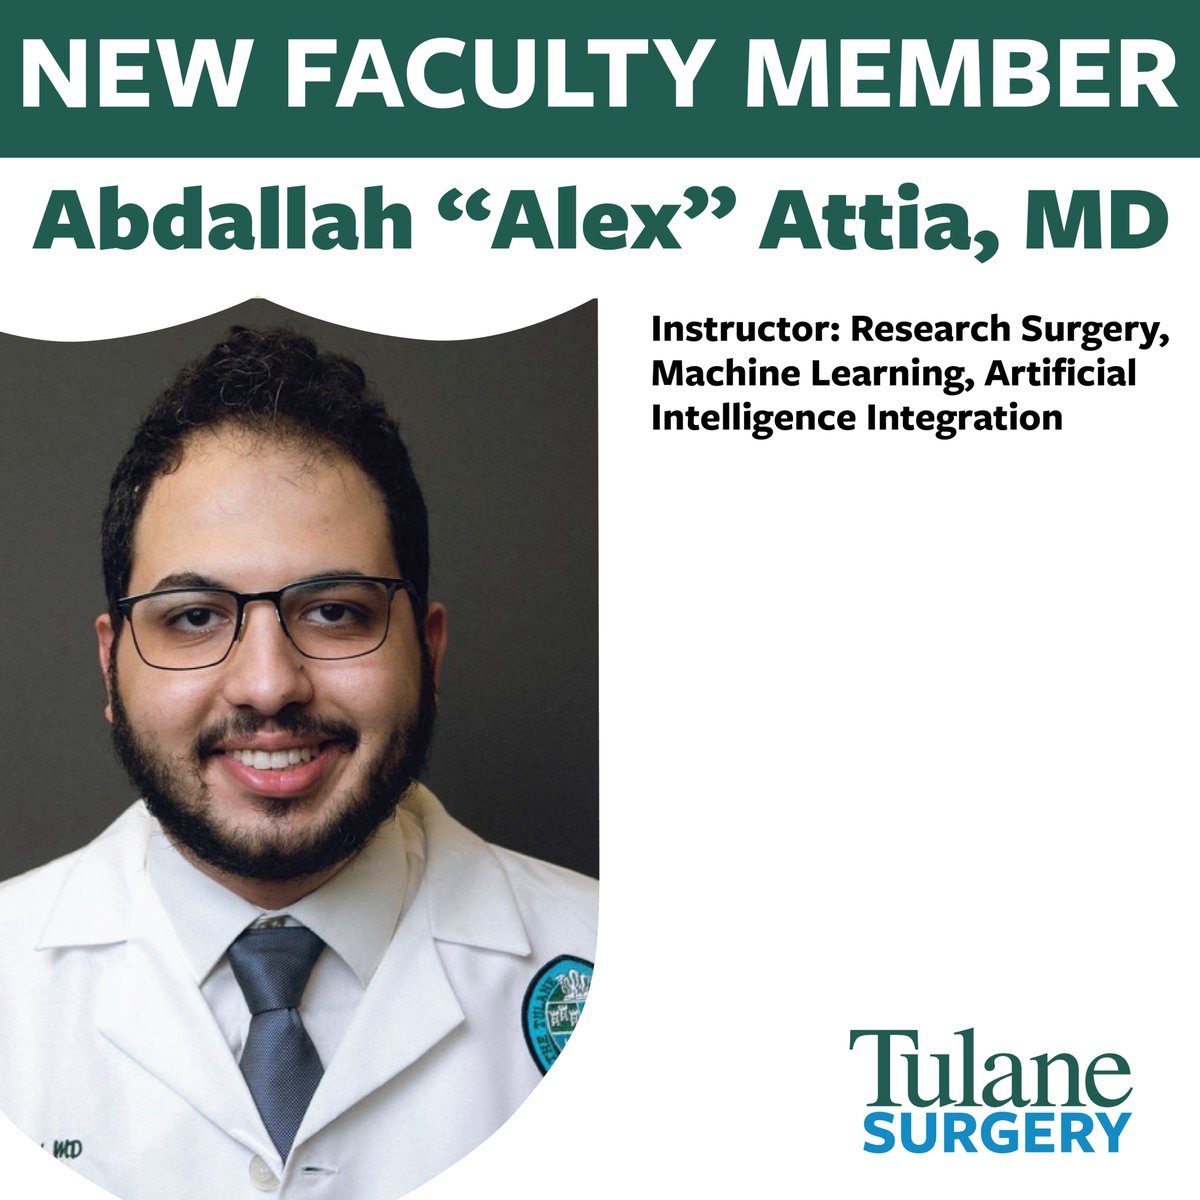 We are thrilled to have Dr. Abdallah “Alex” Attia join us as one of our newest faculty members! Dr. Attia joins as an Instructor of Research Surgery, Machine Learning, and Artificial Intelligence Integration. #tulanesurgery #AI #tulaneresearch